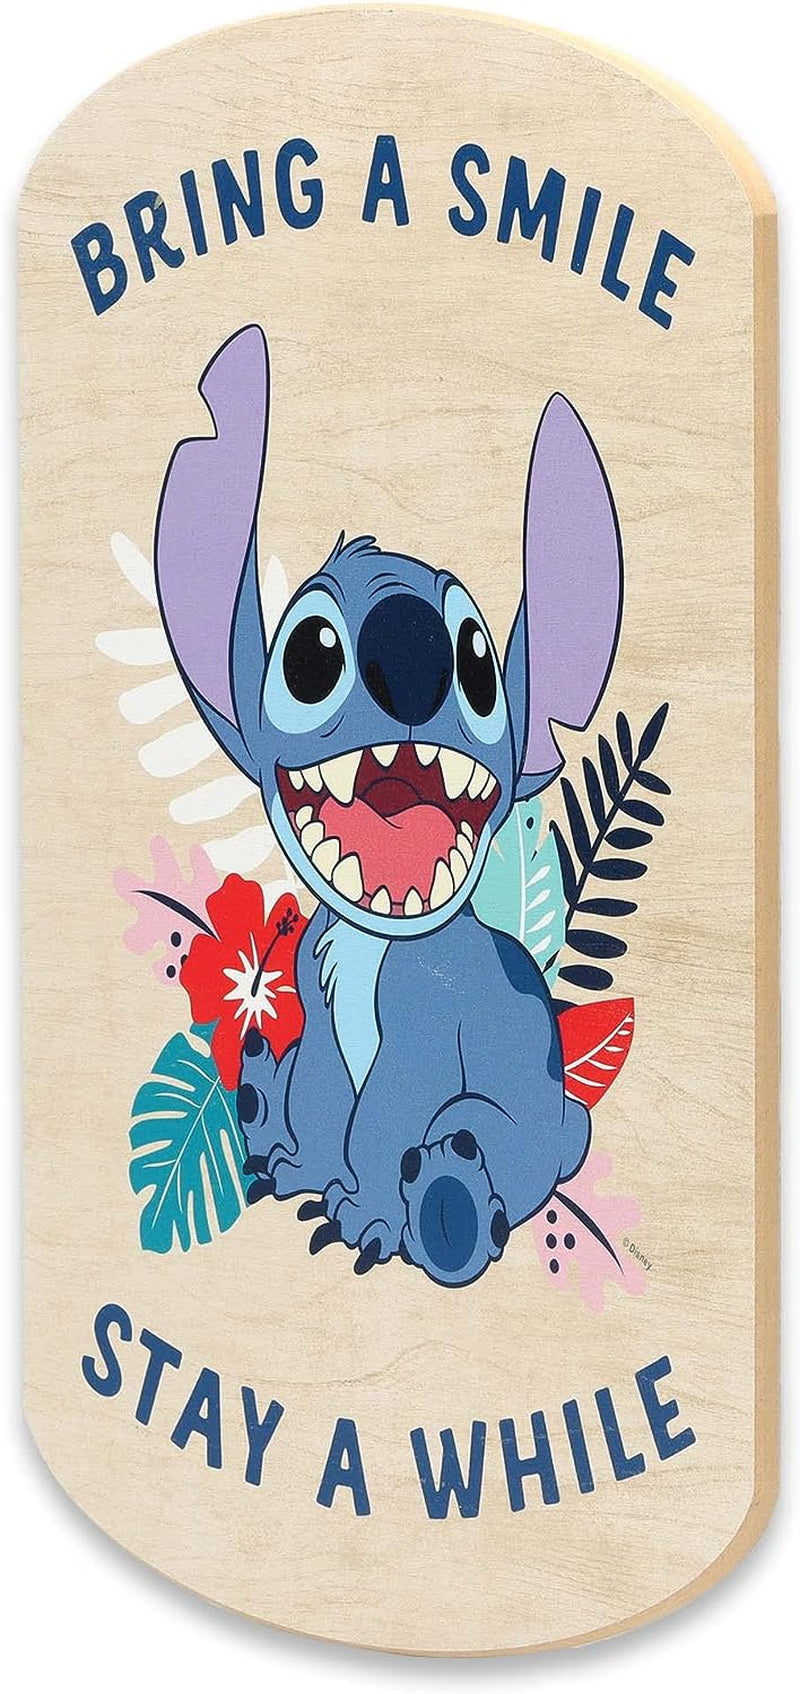 Disney Lilo and Stitch Bring a Smile Stay a While Wood Wall Decor - Fun Stitch Sign for Home Decorating